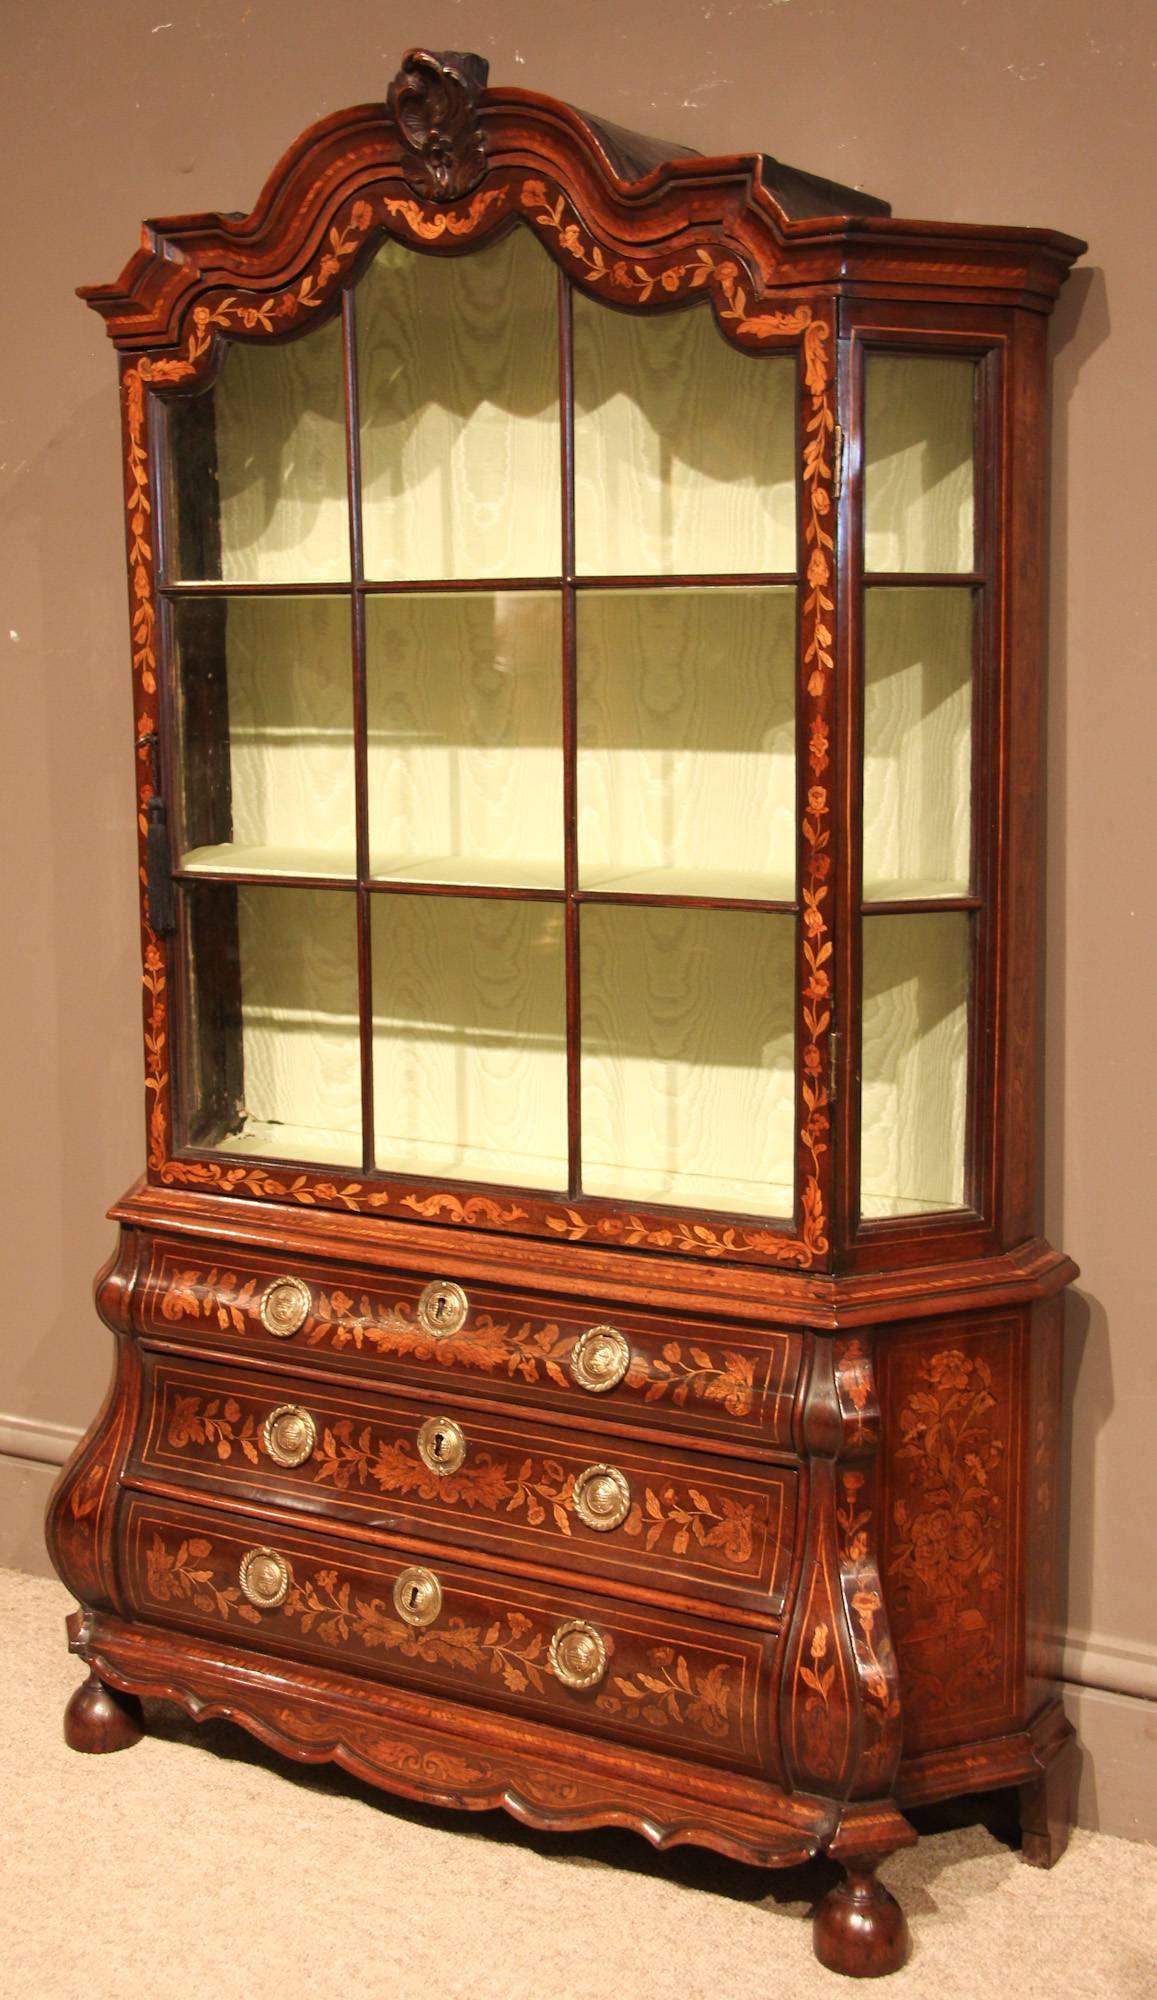 Late 18th century Dutch walnut and marquetry display cabinet of fine quality, circa 1785. This unusual size, perhaps made for a child. The inlay being of high quality, probably a wealthy merchants daughter, to display porcelain.

All of the items